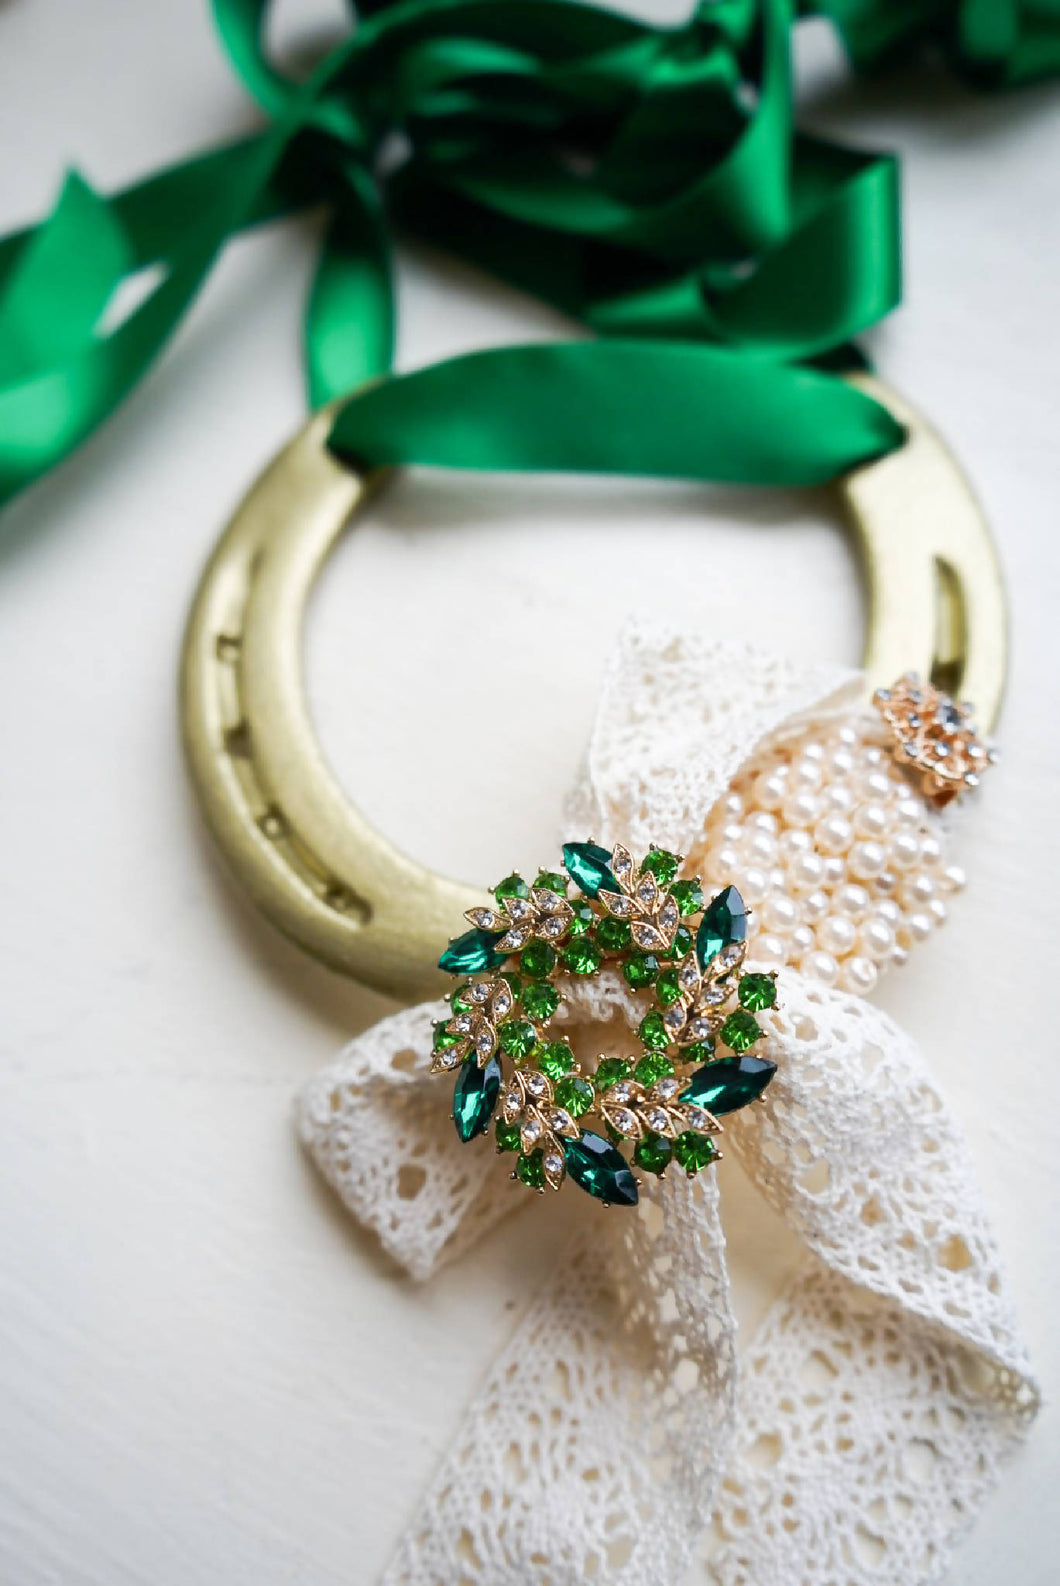 Emerald lucky Horse Shoe Wedding or Engagement gift